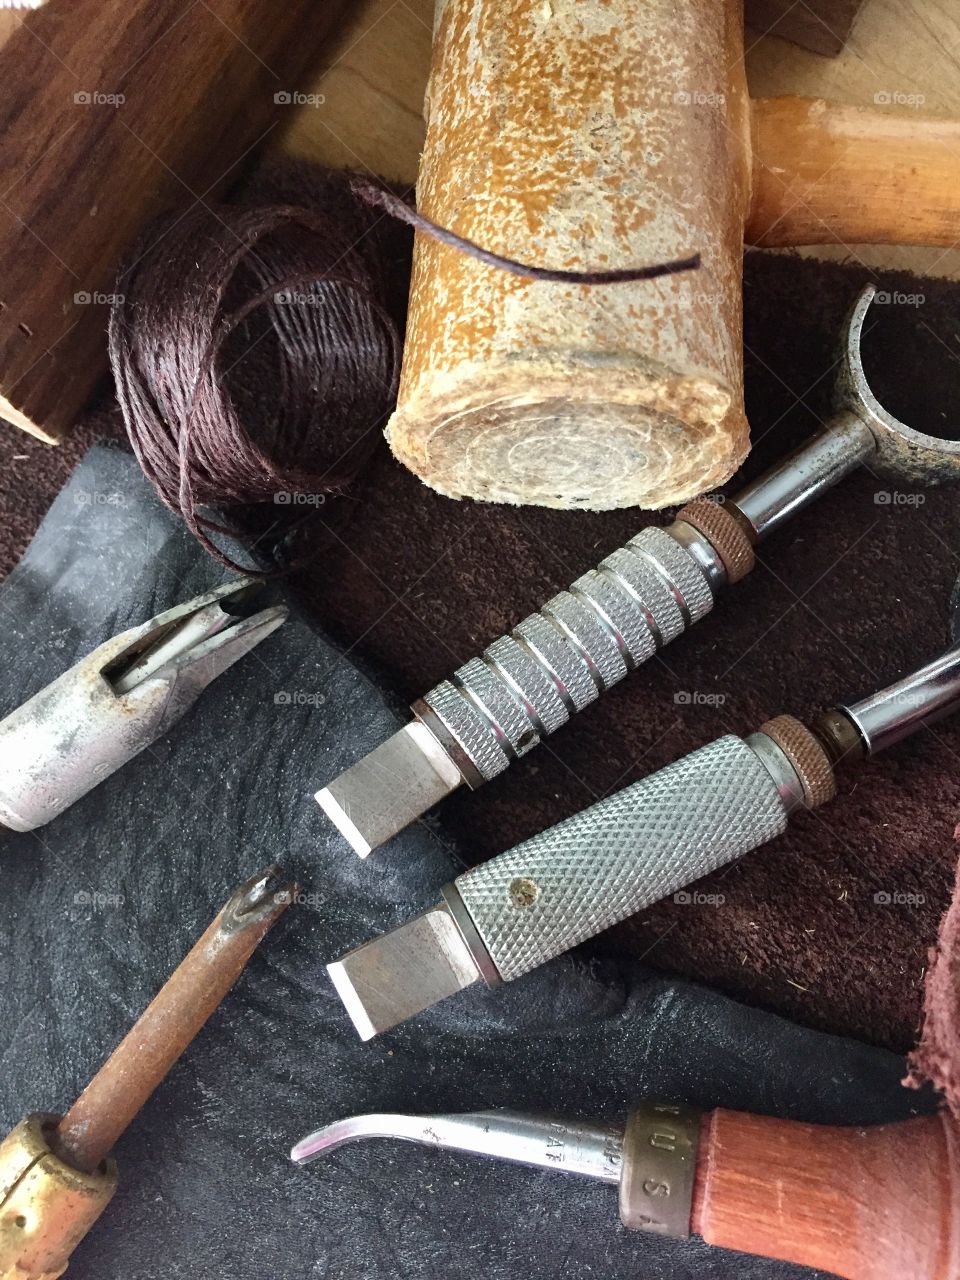 Arts & Crafts Supply - mallet, thread for leather stitching, and leather scraps, leather crafting tools